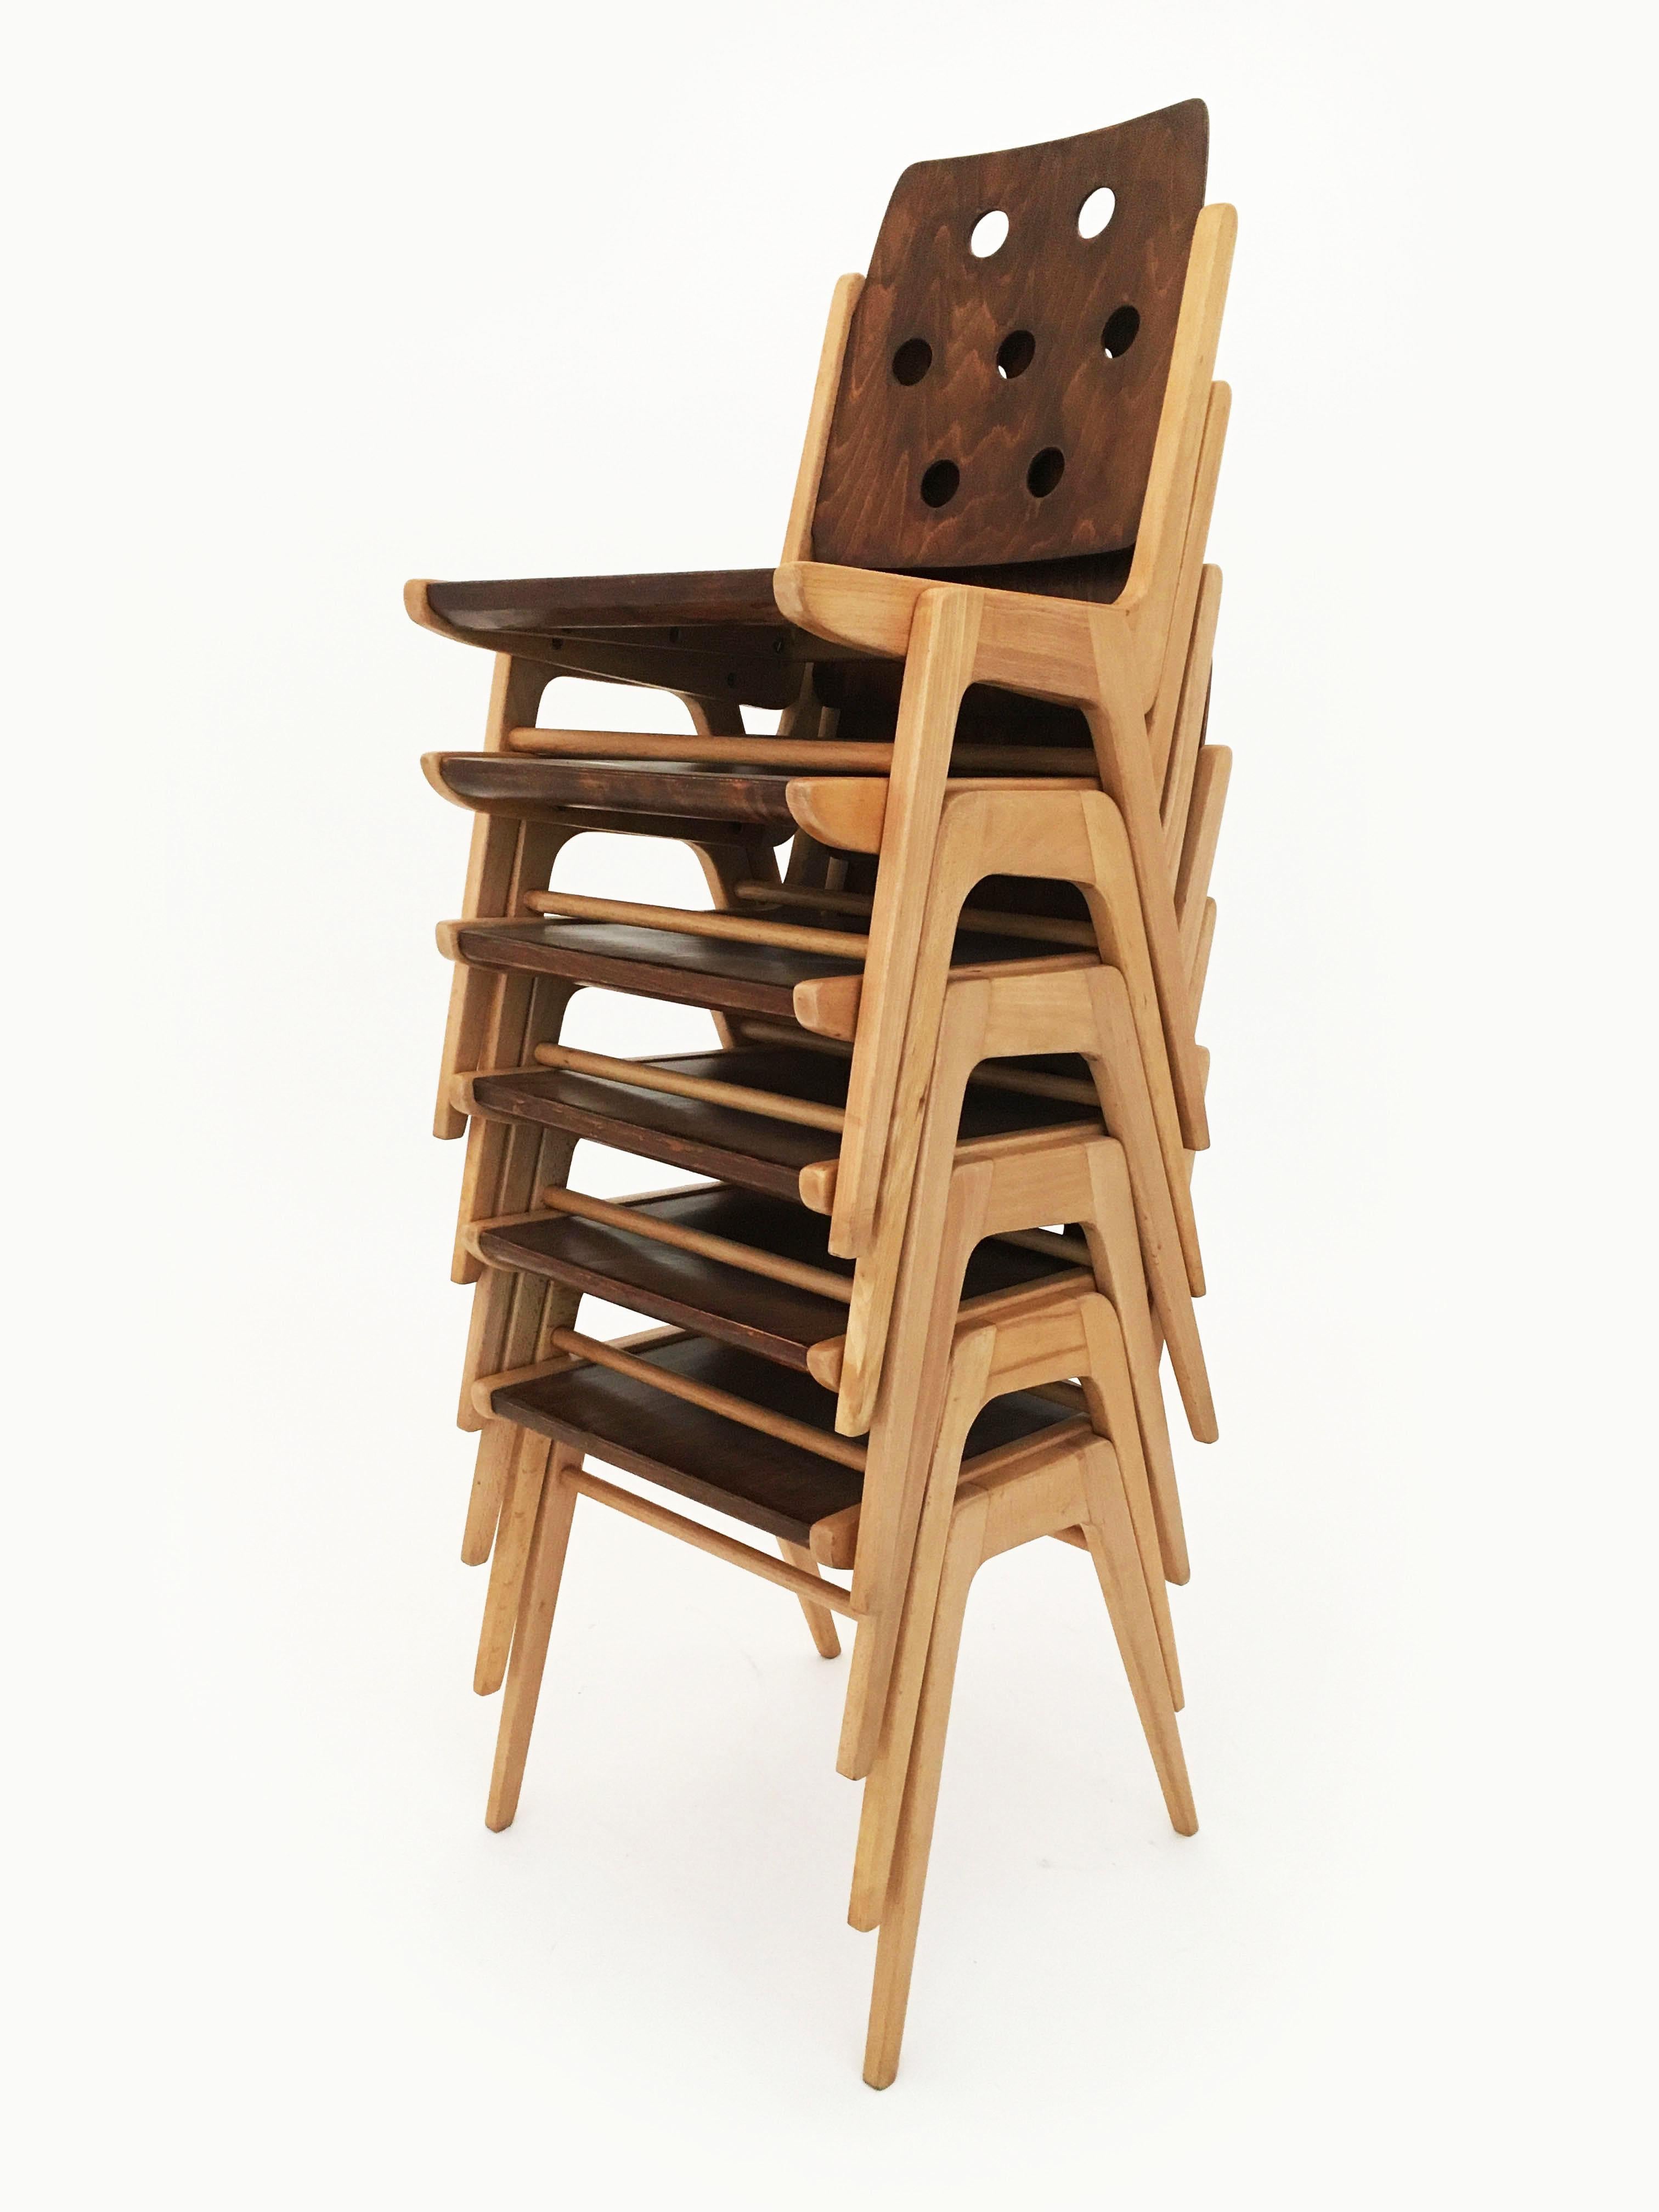 Franz Schuster Stacking Chairs Model 'Maestro', Set of Six, Austria 1950s Similar to the more famous Roland Rainer Stadthallen Chair, the Franz Schuster's design for a stacking chair is equally elegant, modern and timeless. The chairs provide a very